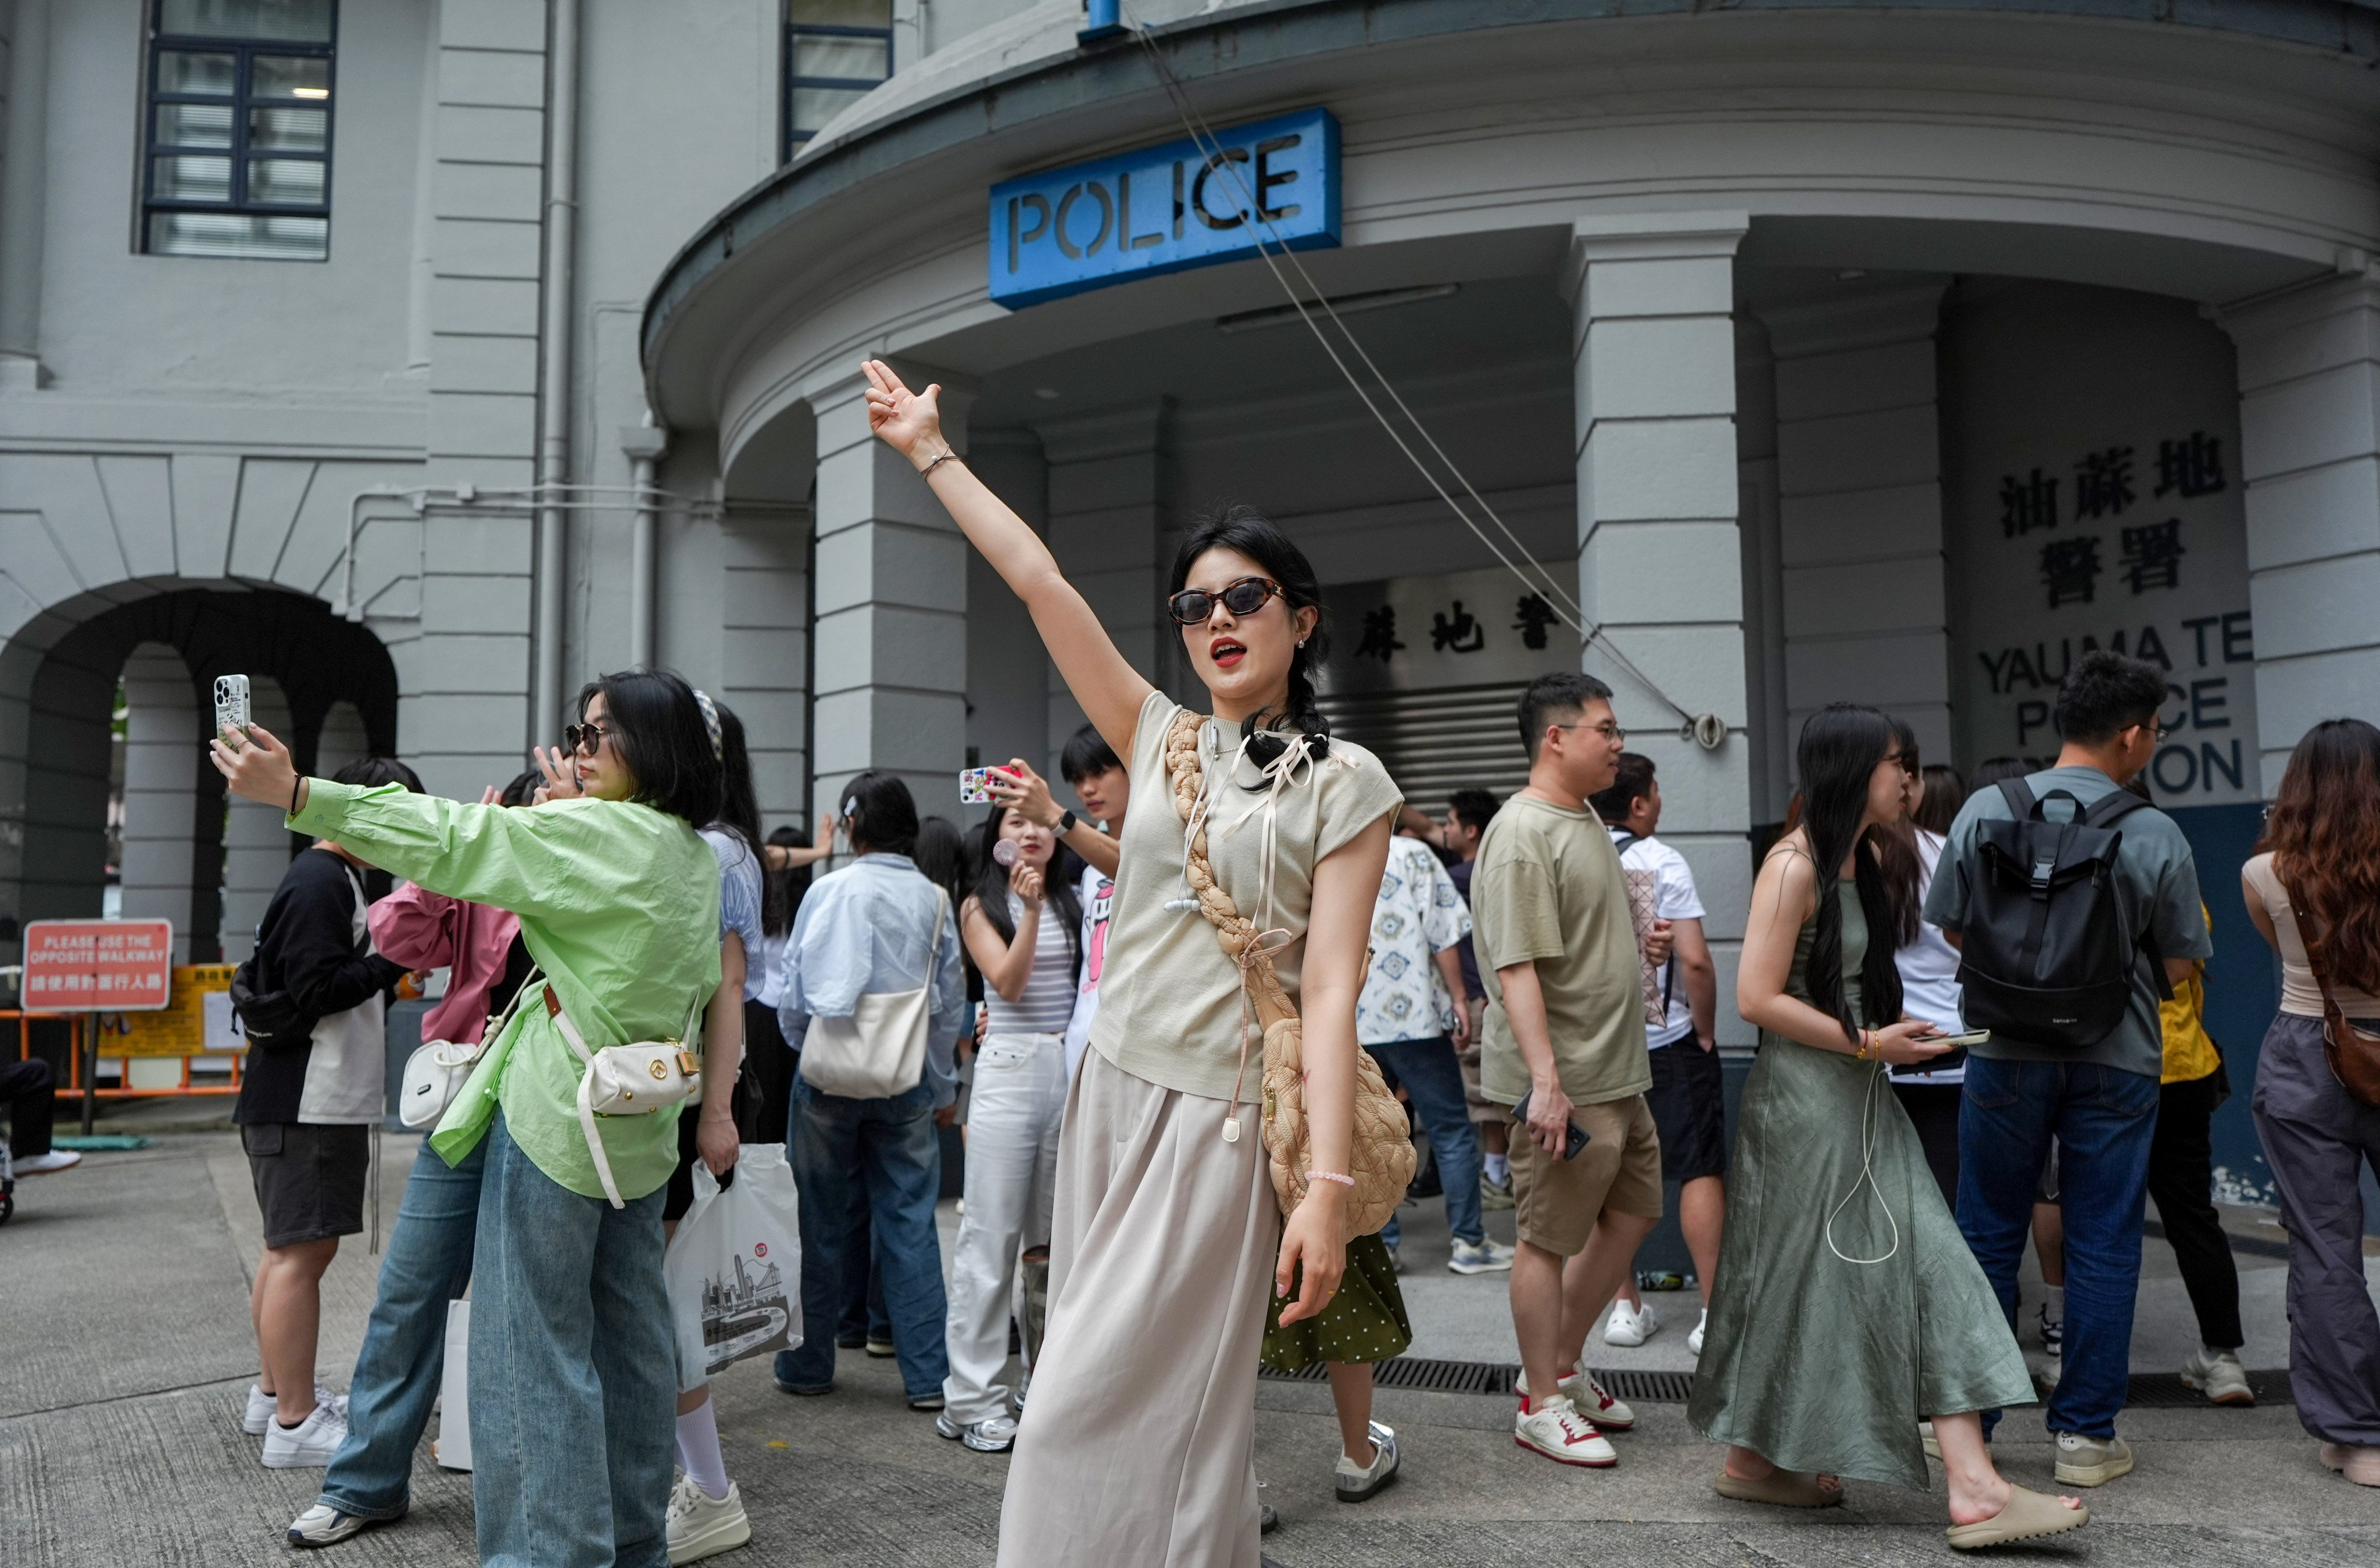 Tourists pose for photos outside Yau Ma Tei Police Station during the recent “golden week” break. Photo: Eugene Lee